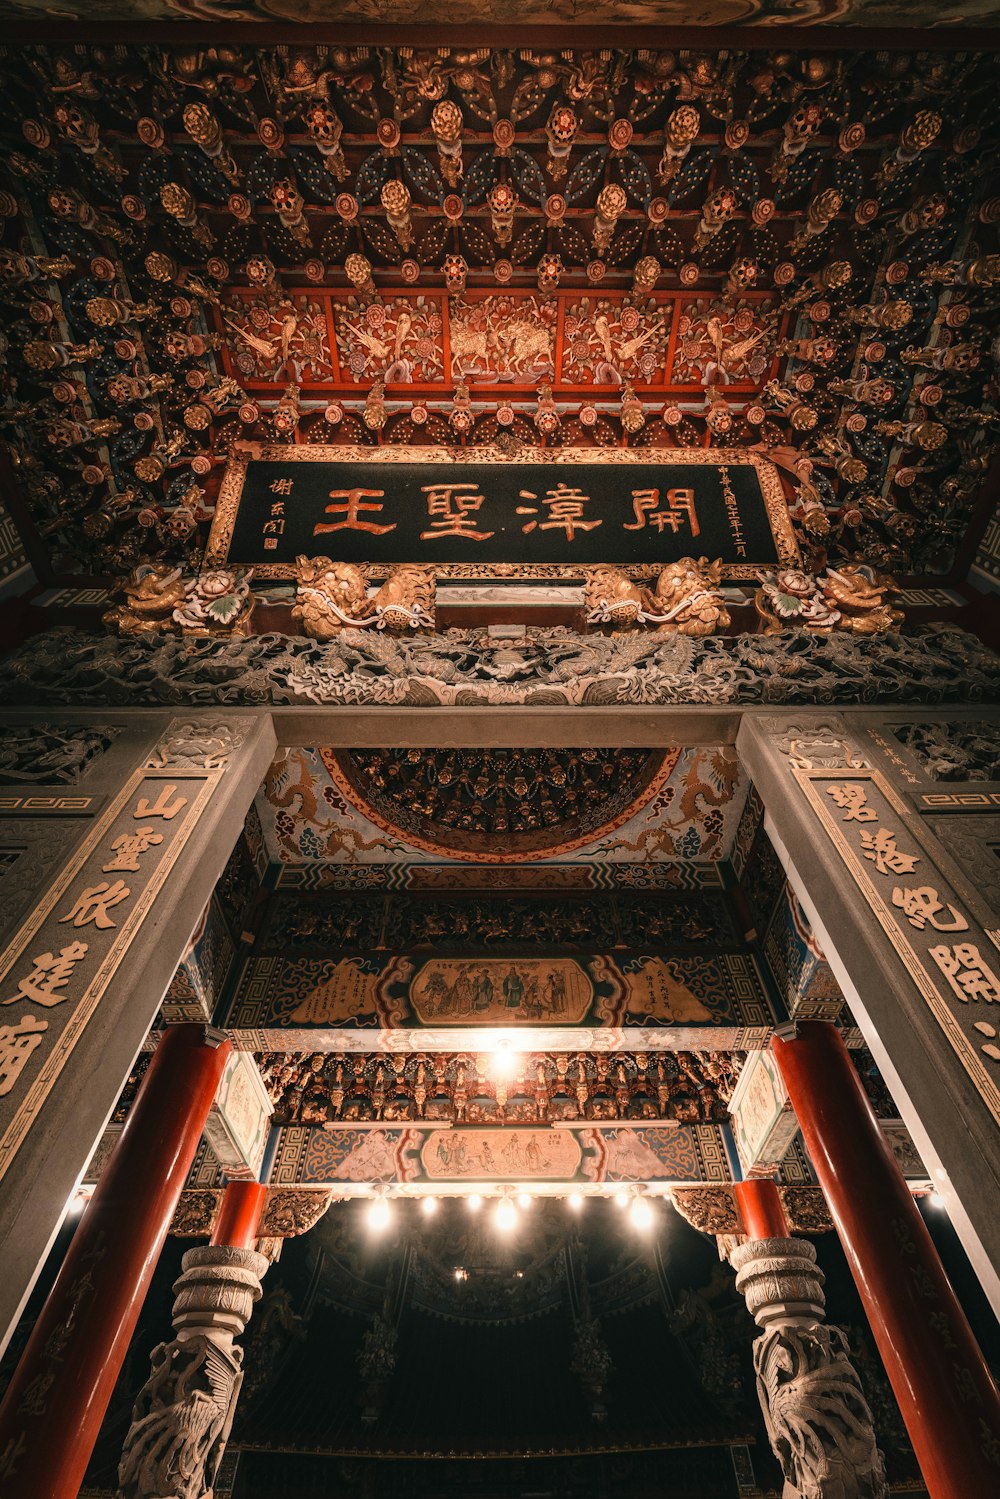 the ceiling of a building with oriental writing on it